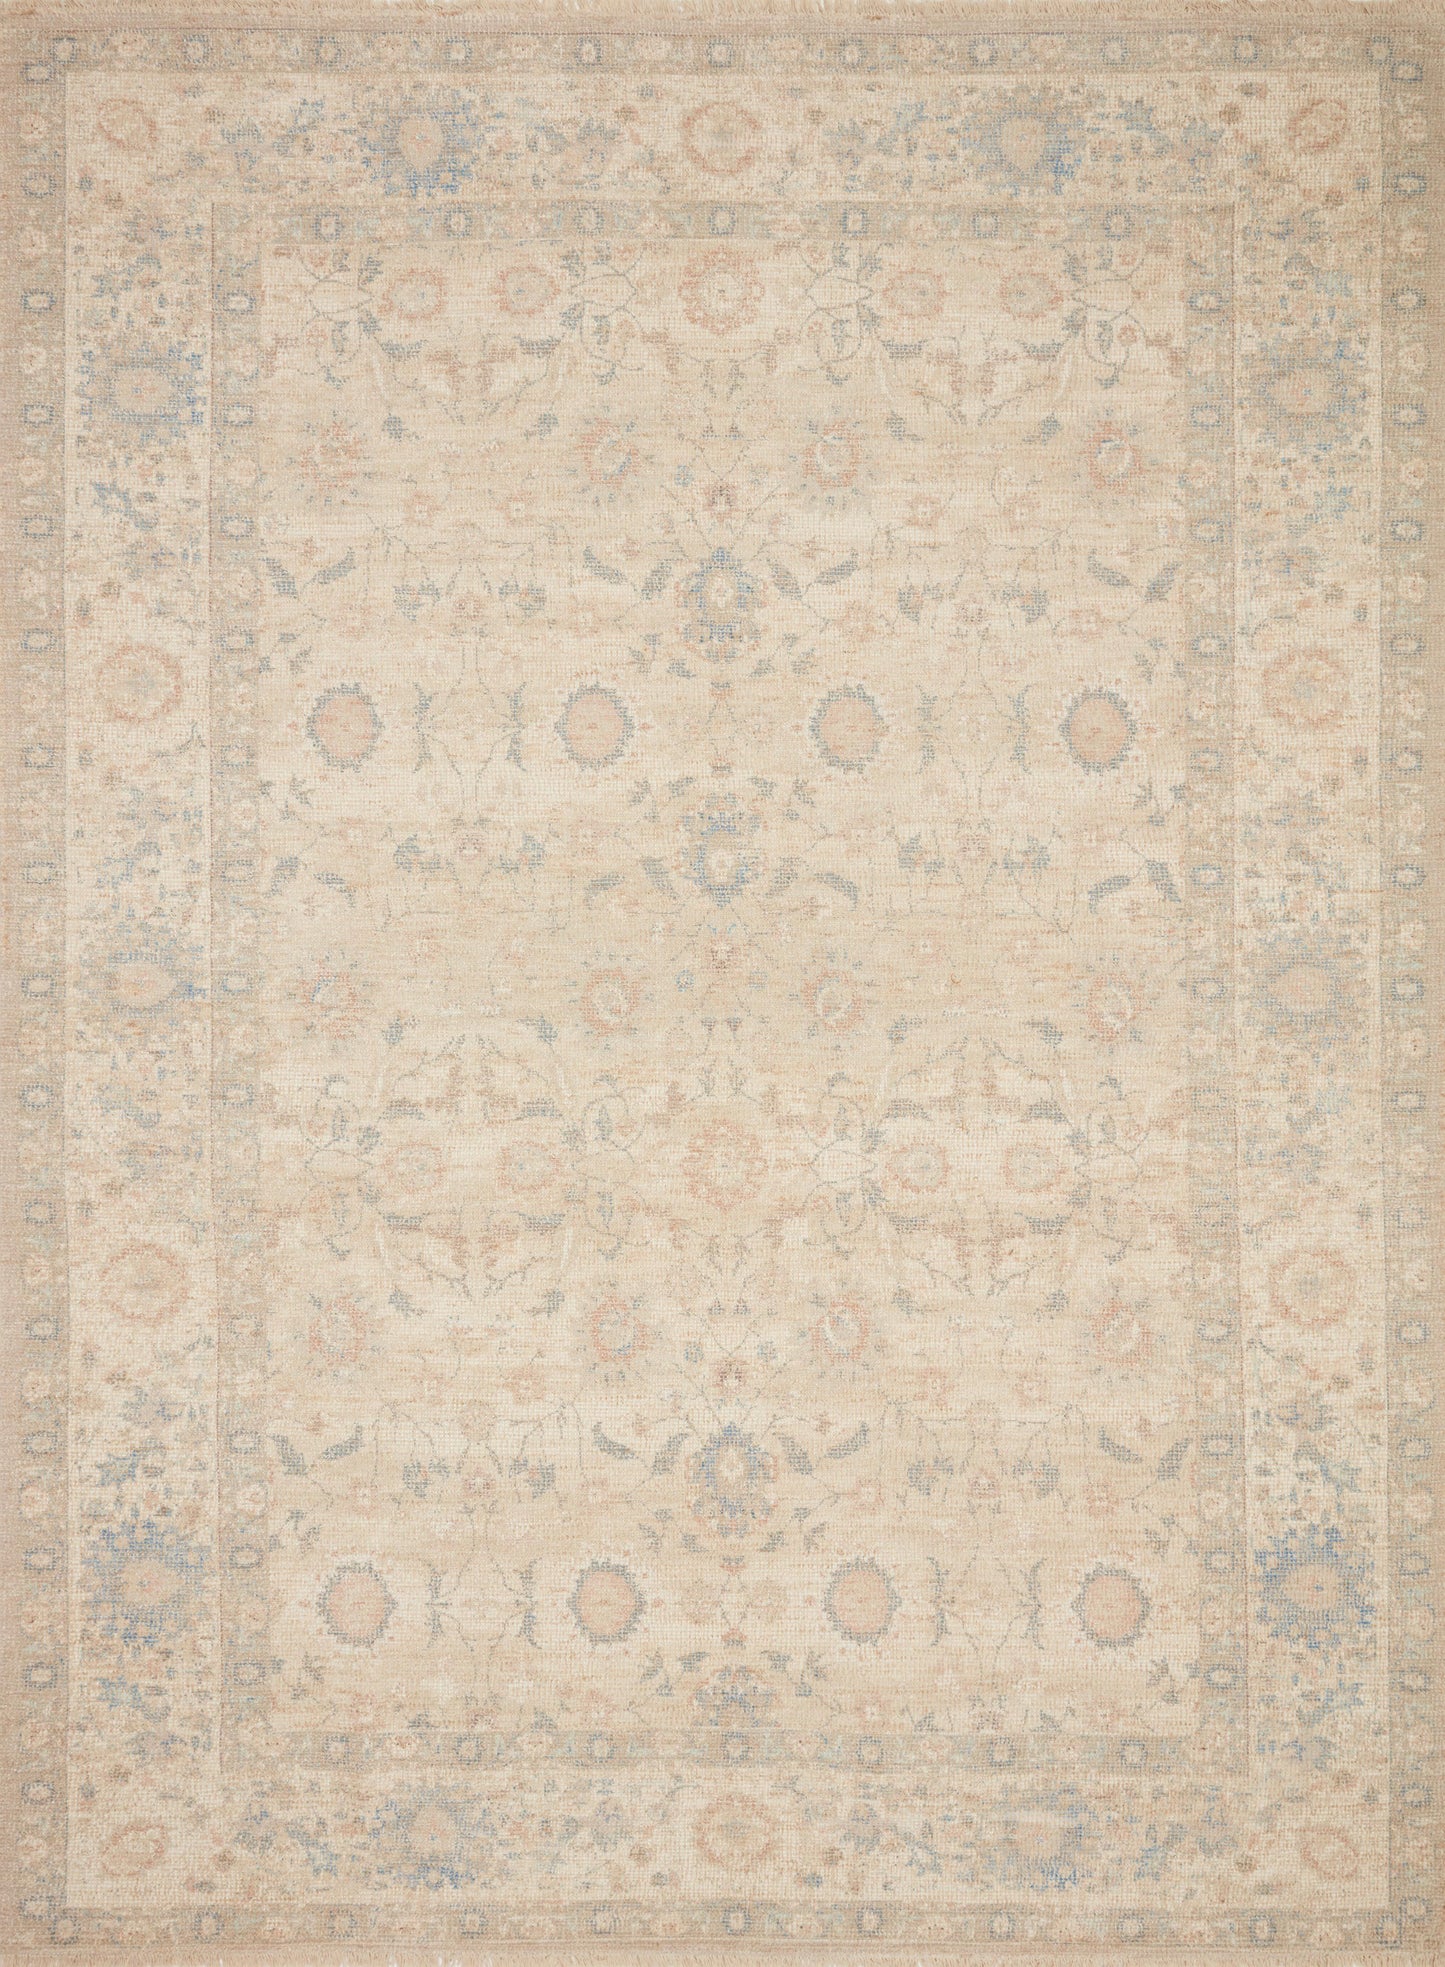 A picture of Loloi's Priya rug, in style PRY-05, color Natural / Blue